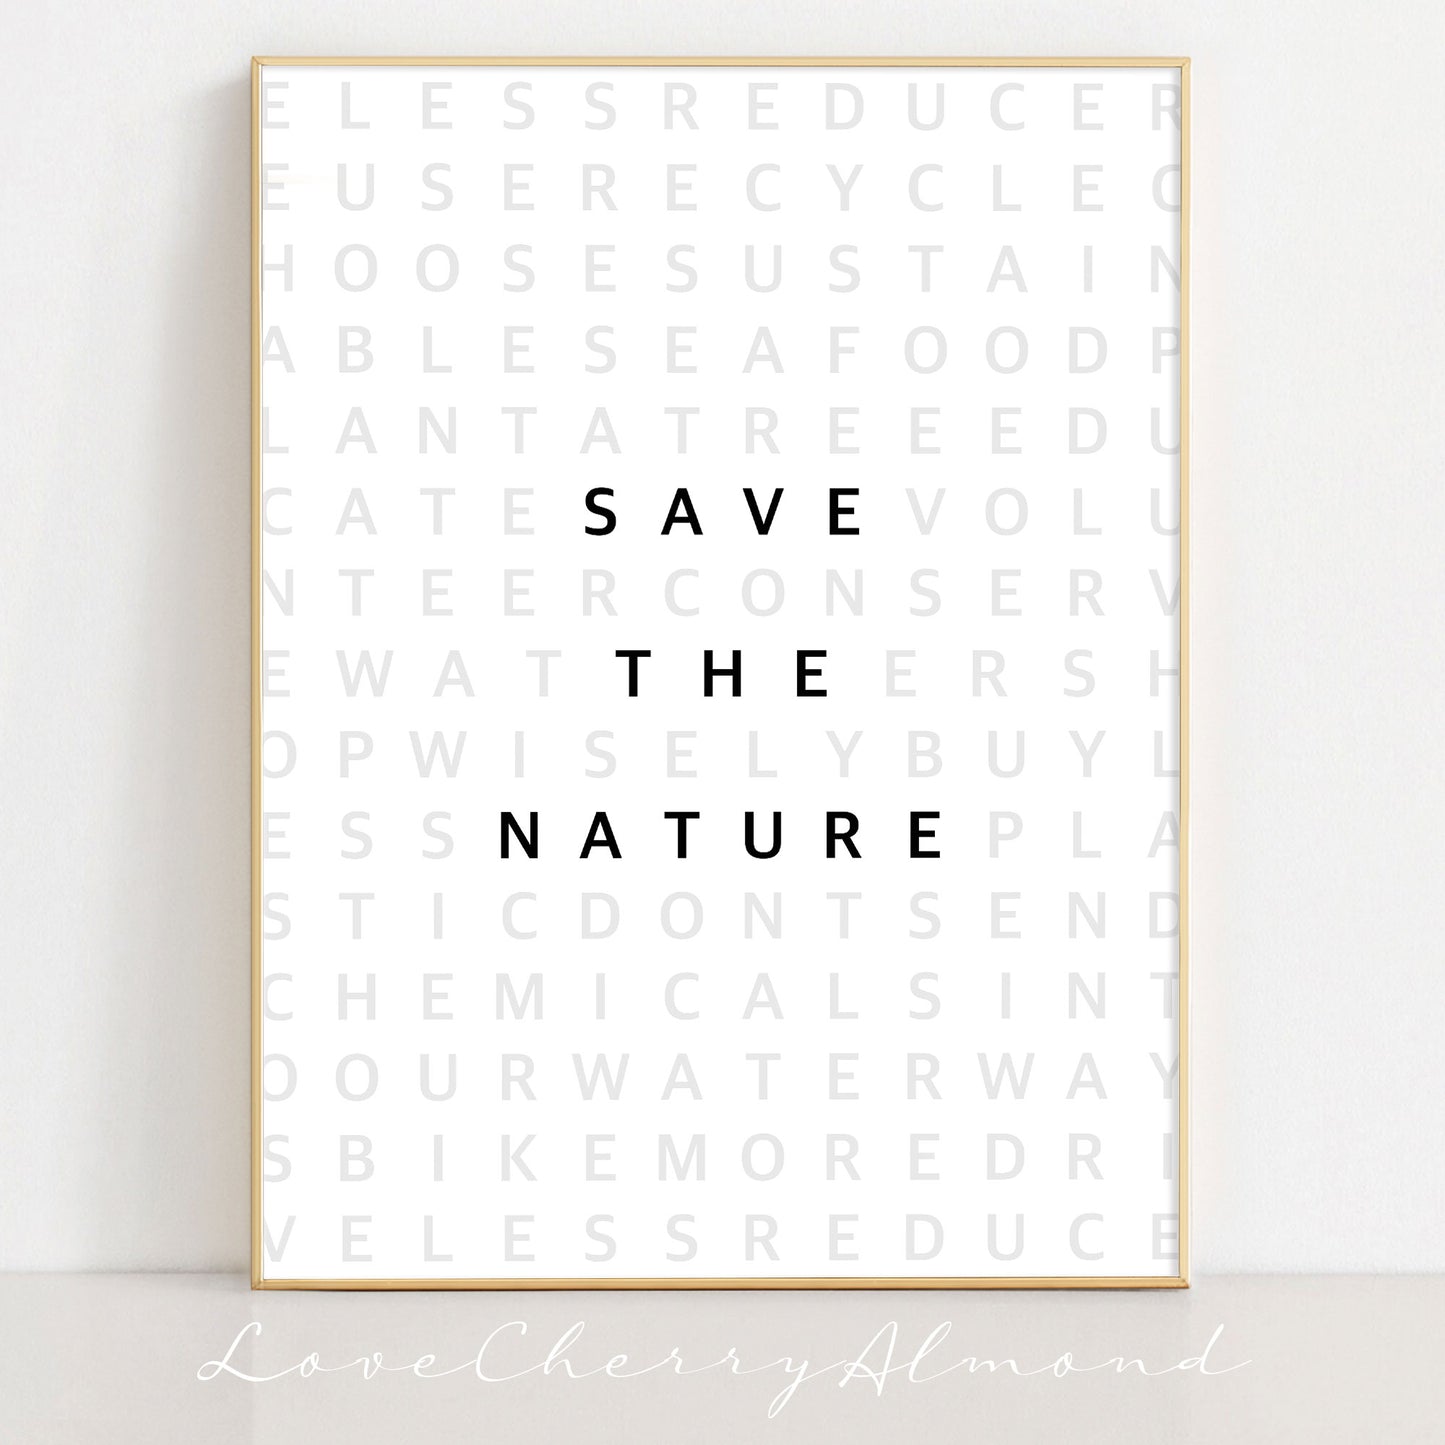 SAVE THE NATURE